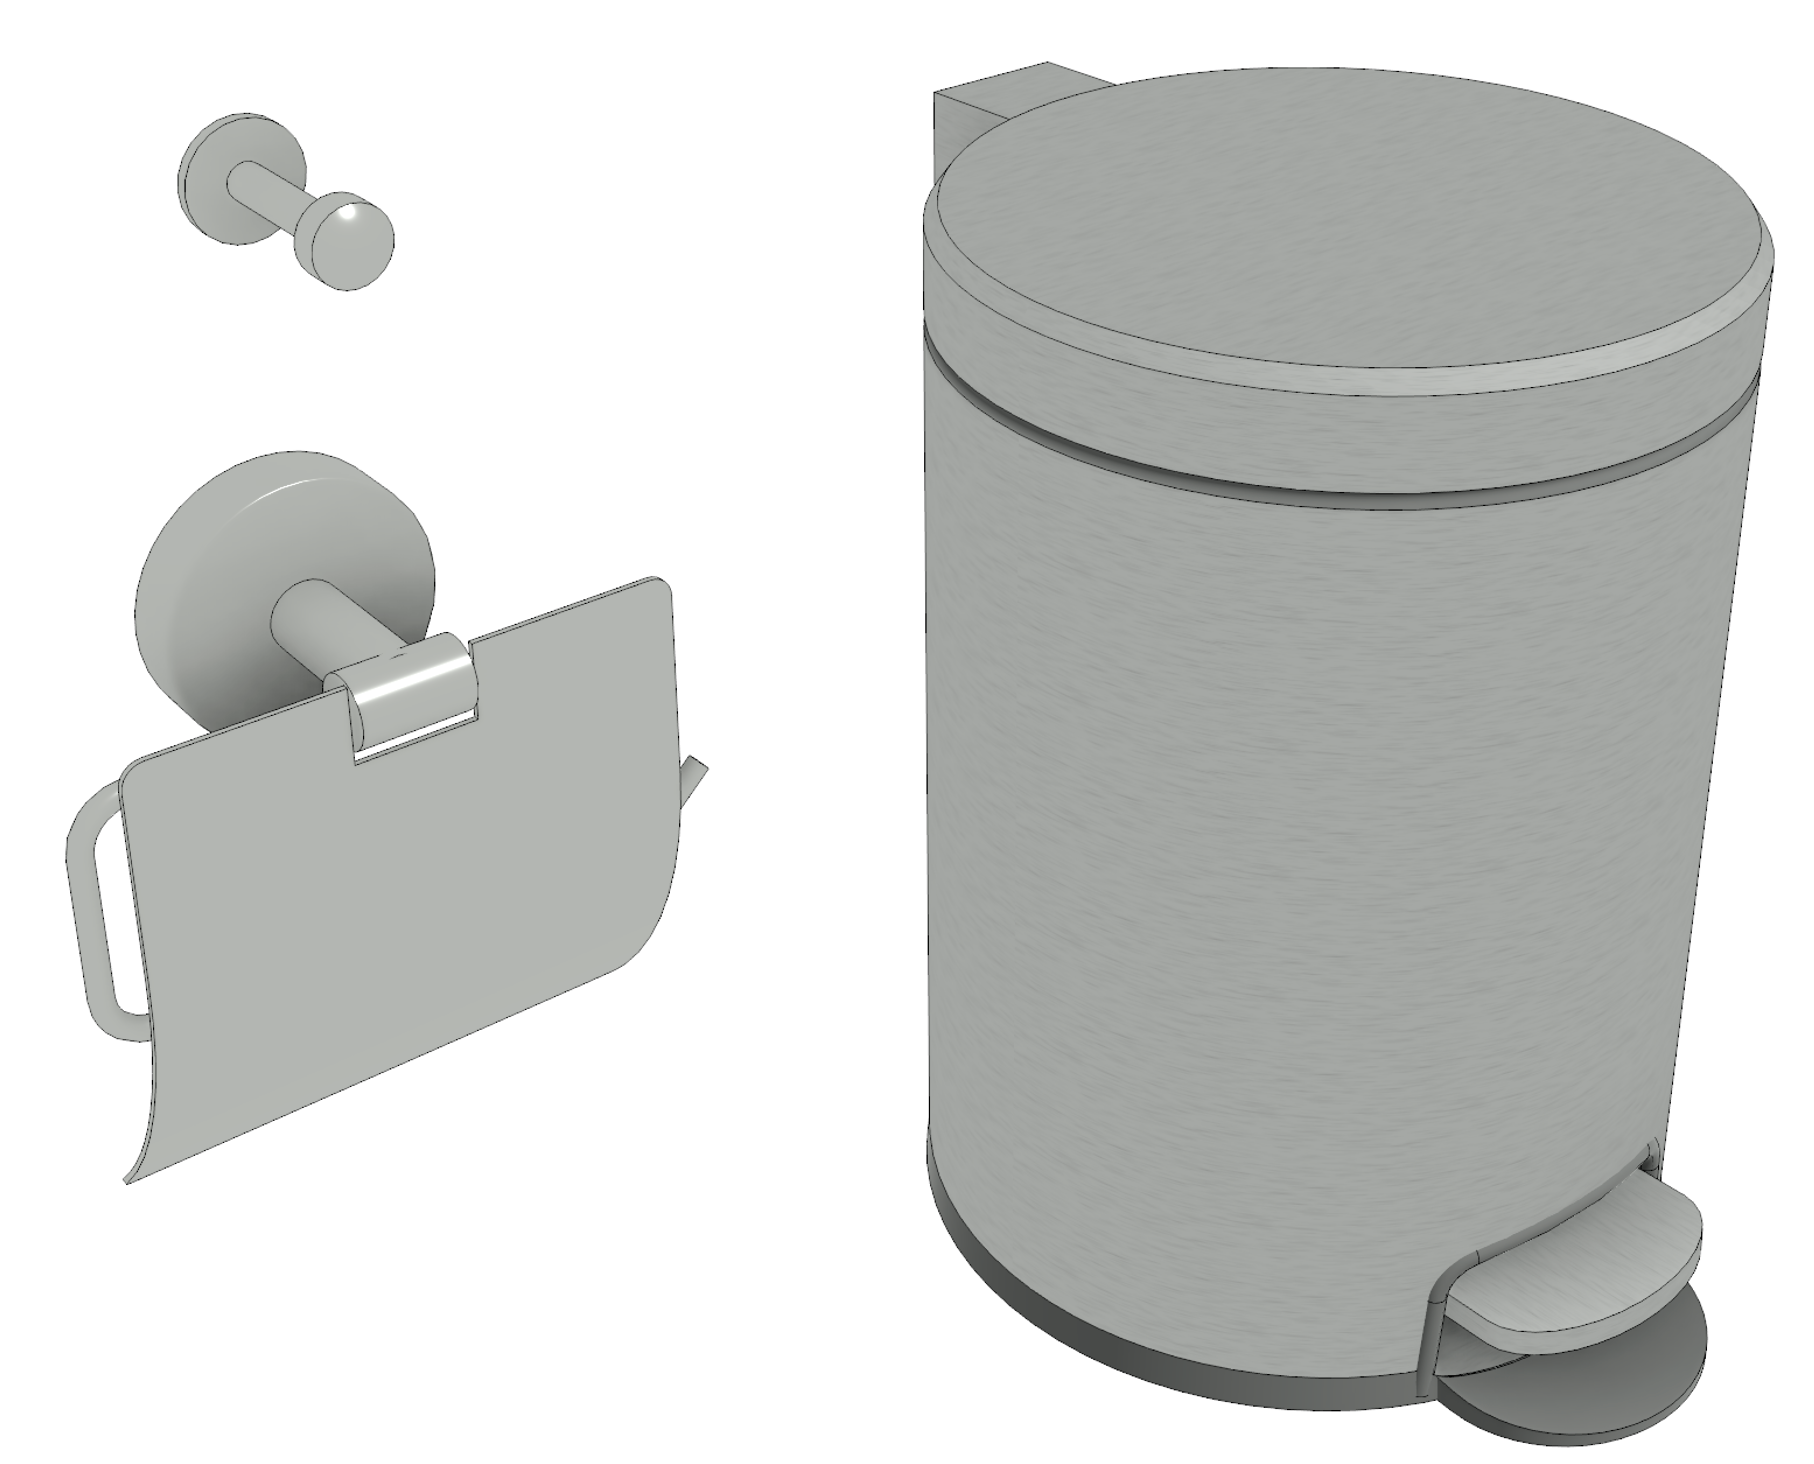 Perspective 3D view showing robe hook, toilet roll holder and pedal bin.